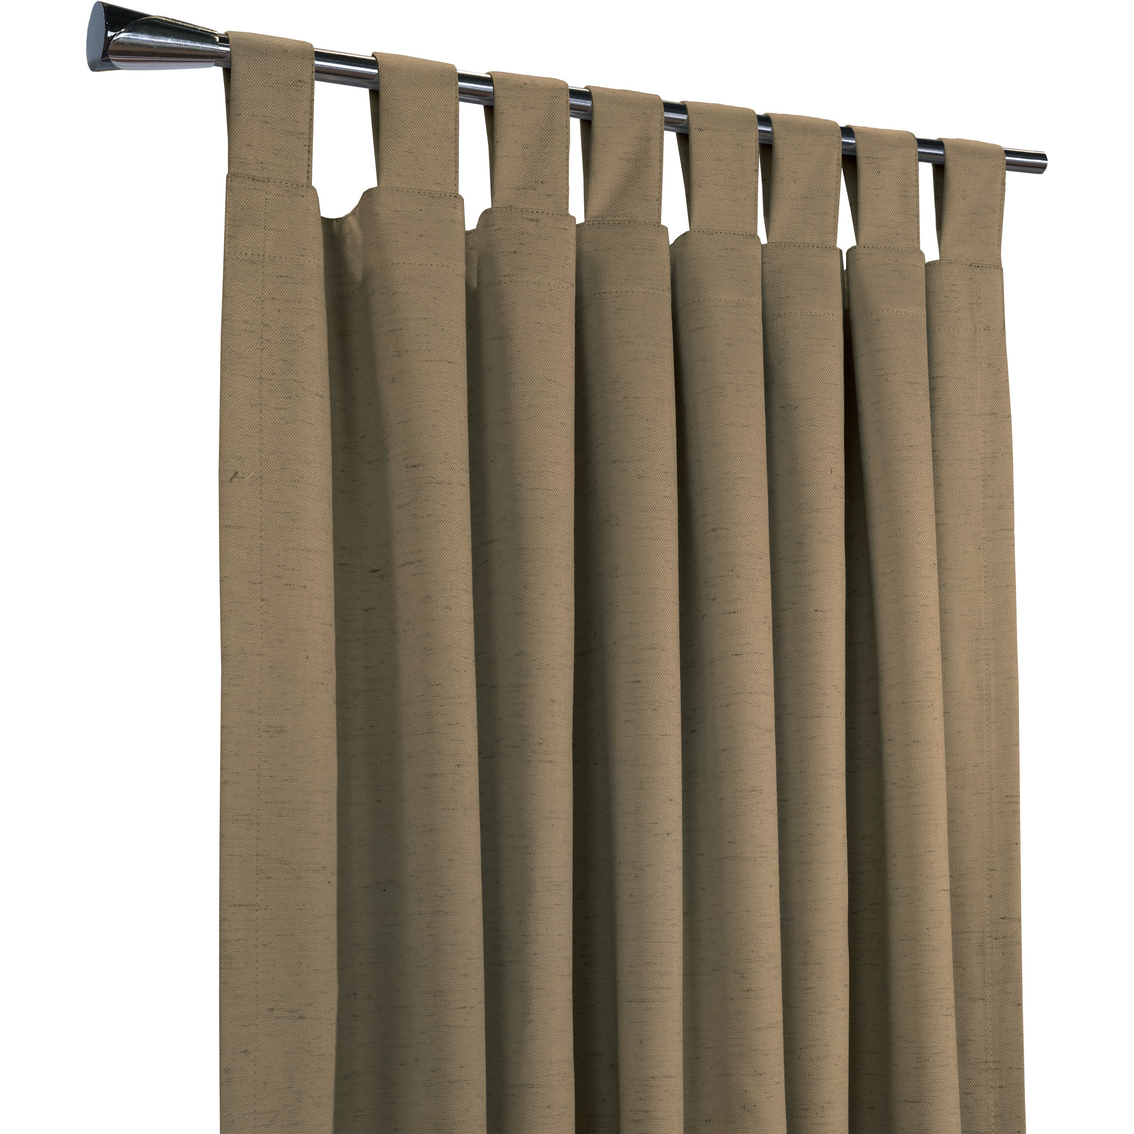 Commonwealth Home Fashions Ventura Tab Top Blackout 63 x 52 in. Curtain Panel 2 pk. - Image 2 of 4